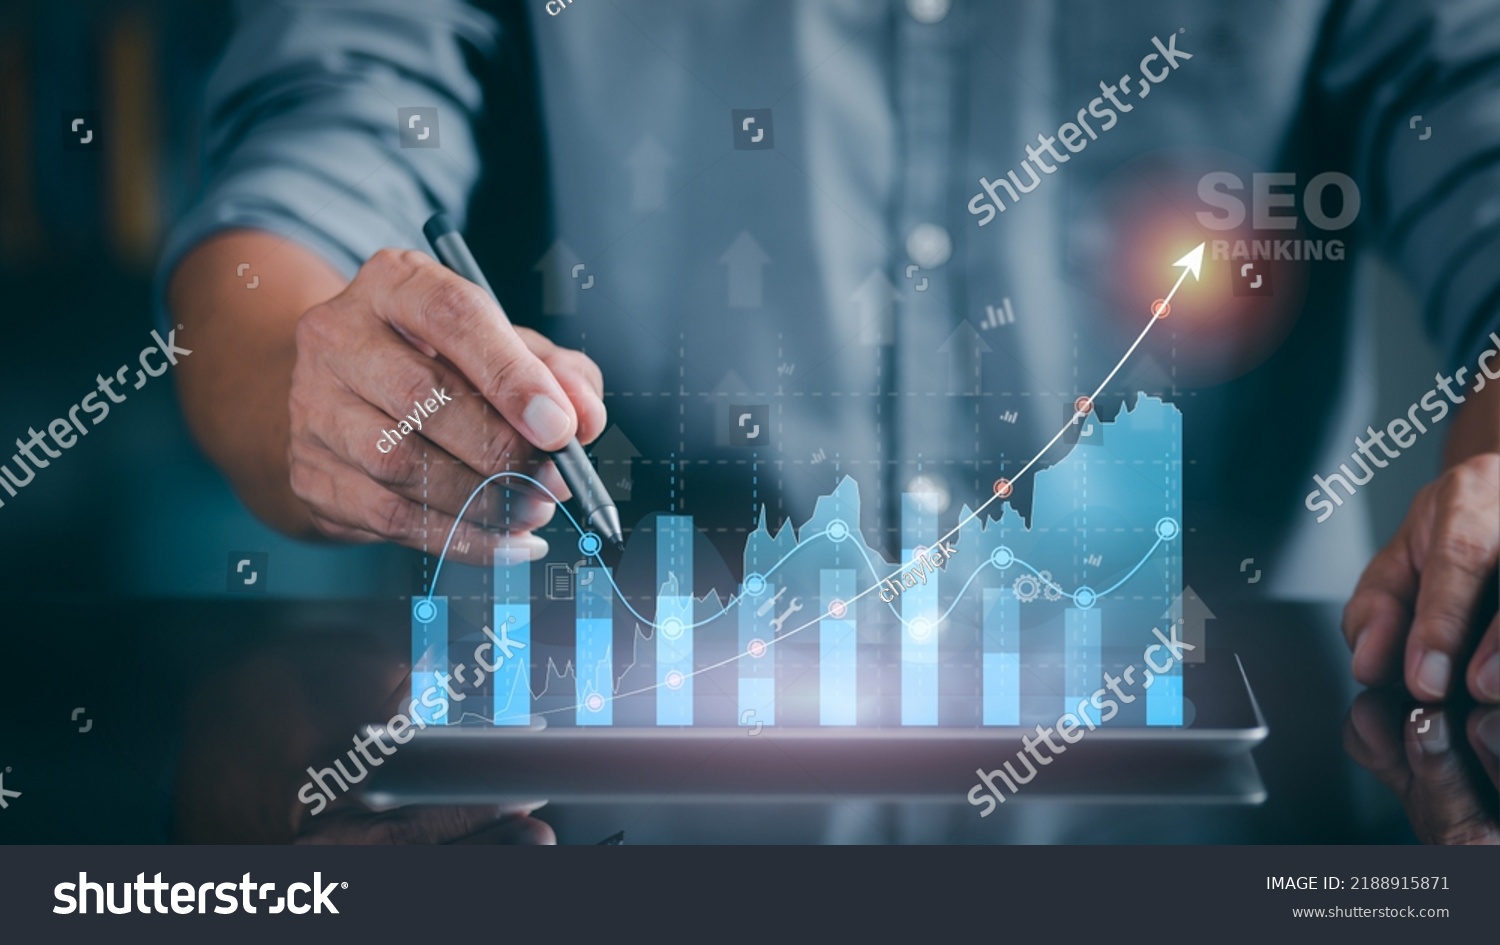 A marketer holds a pen pointing to a graph and shows SEO concepts, optimization analysis tools, search engine rankings, social media sites based on results analysis data. #2188915871